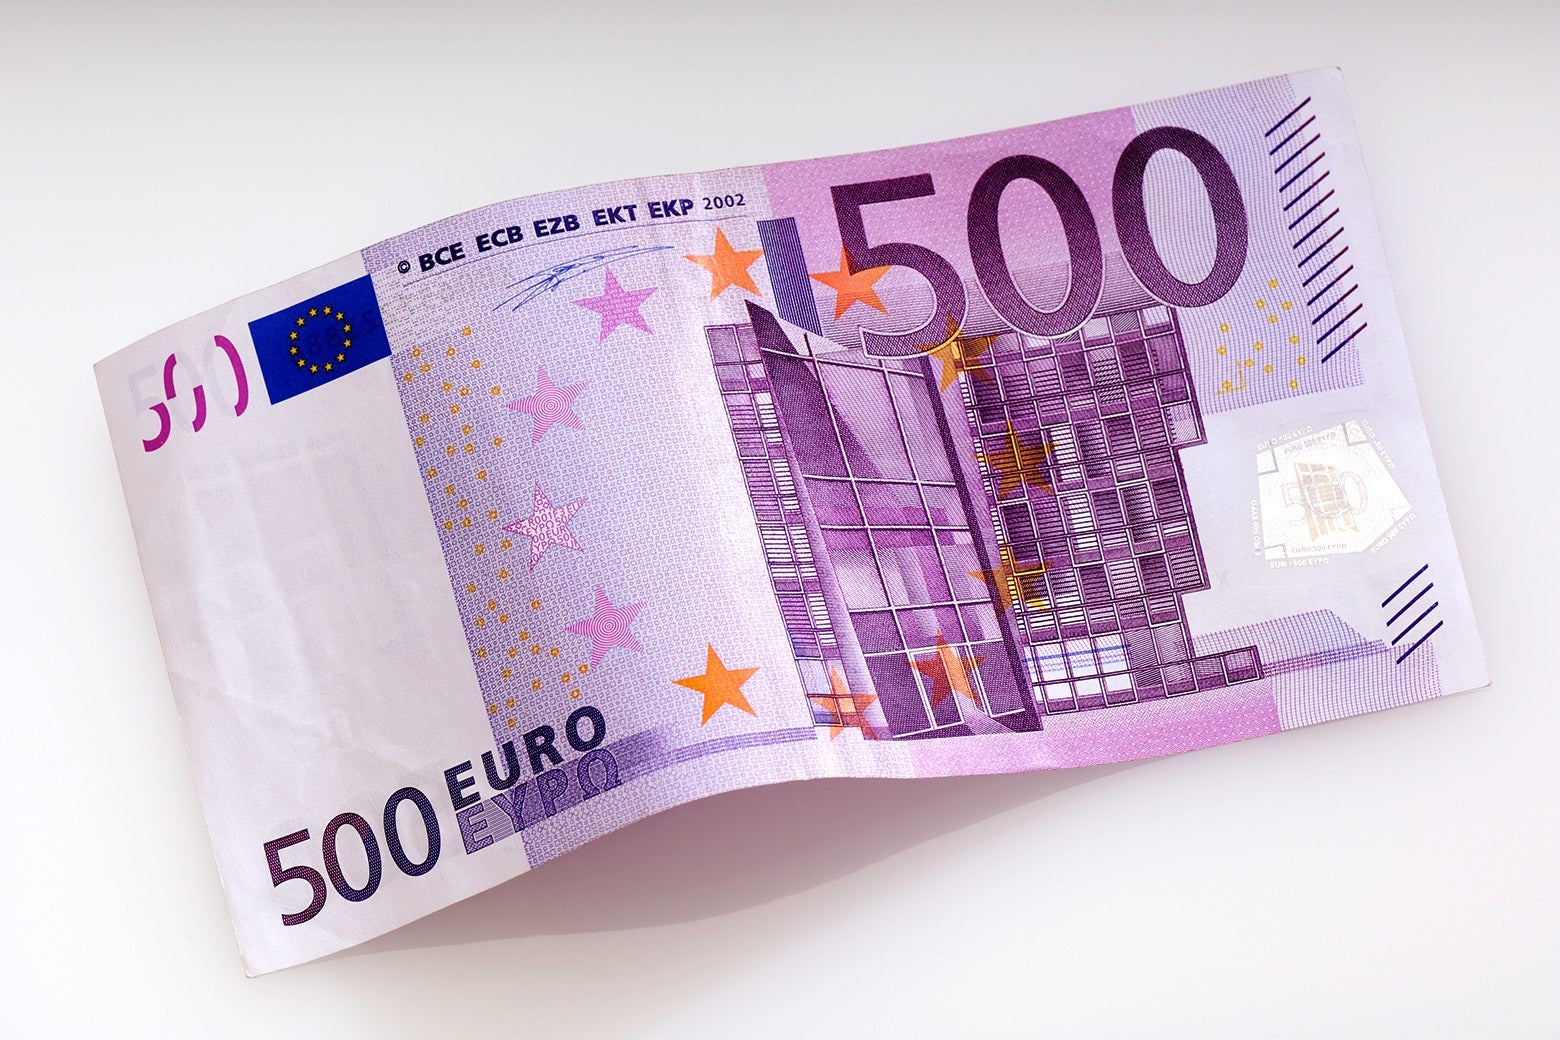 A 500 euro note.